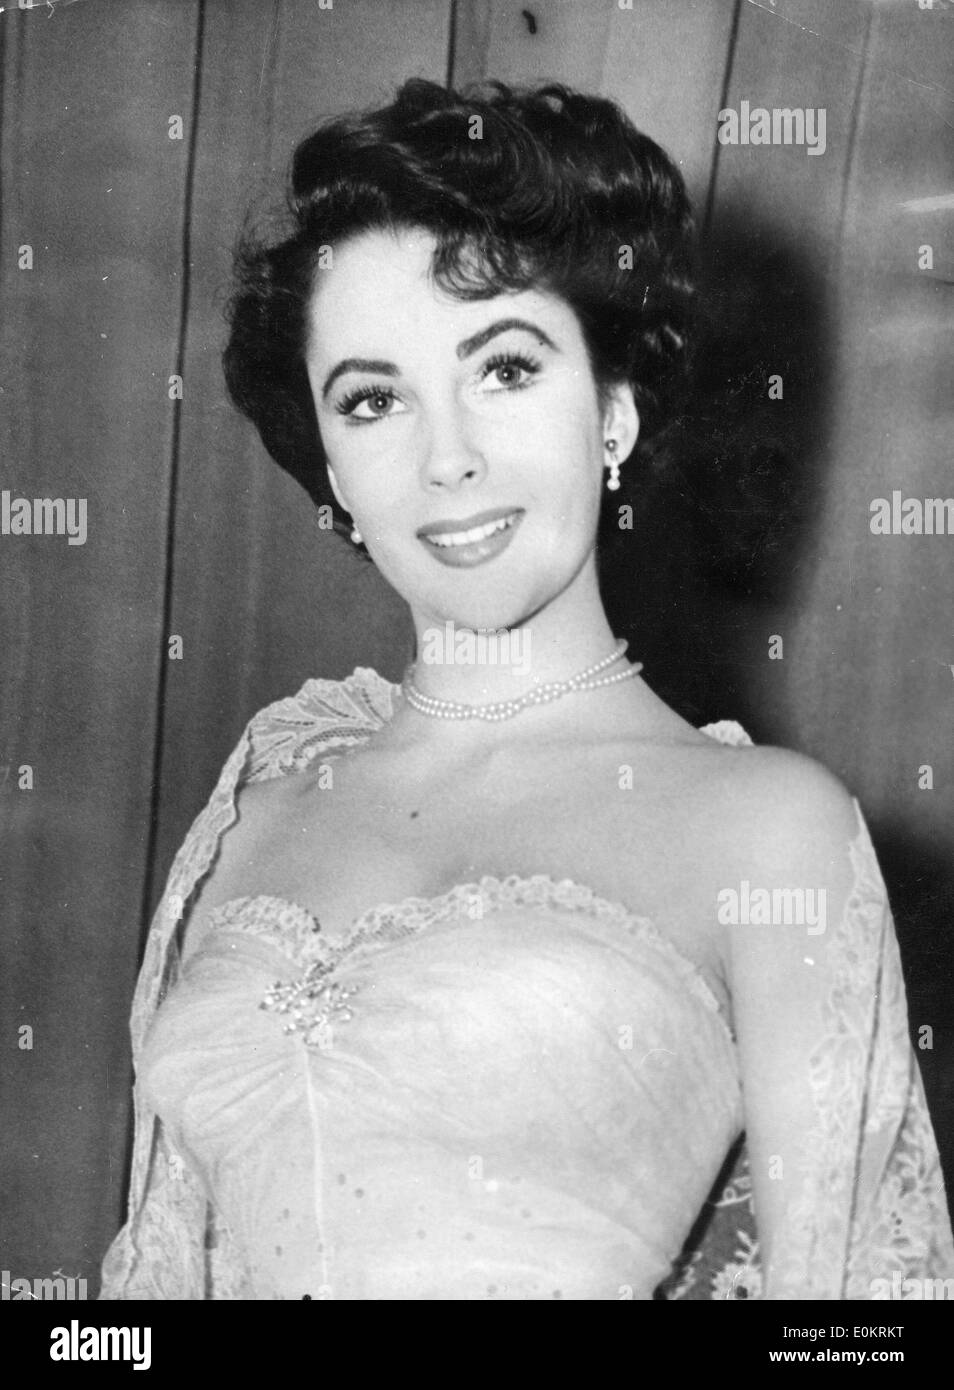 Actress Elizabeth Taylor at an event Stock Photo